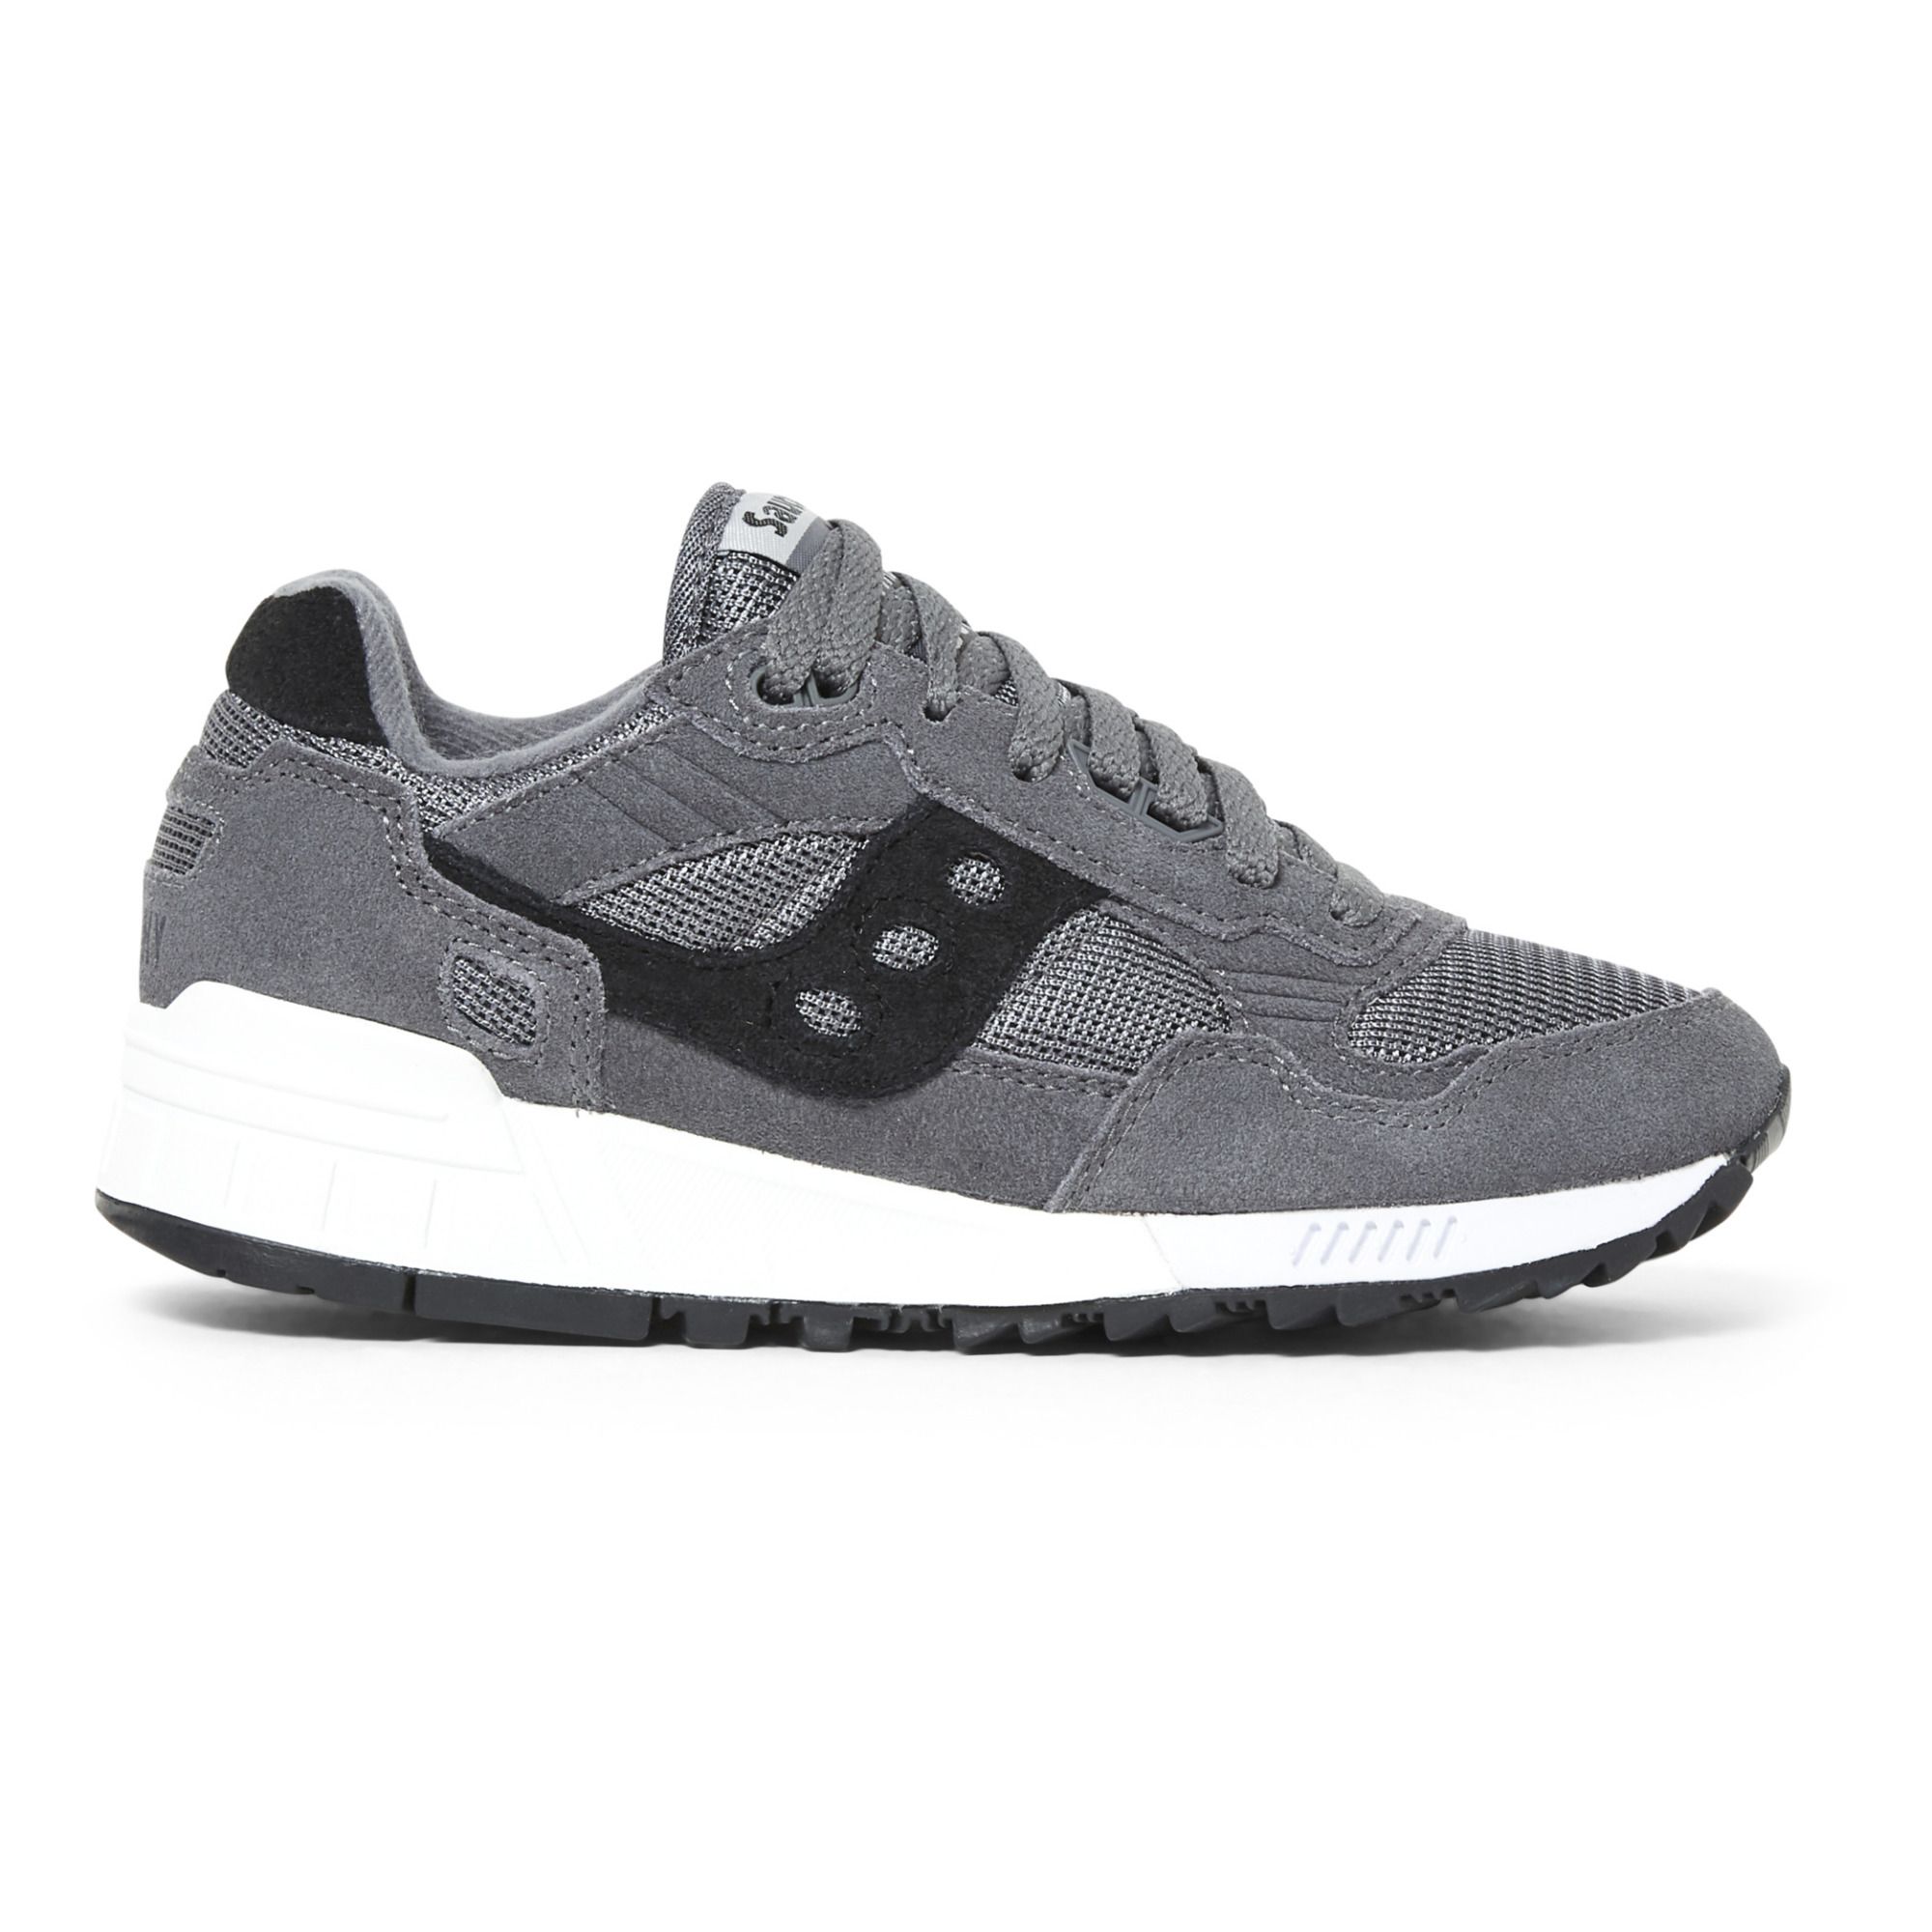 Saucony - Baskets Shadow 5000 - Femme - Gris anthracite